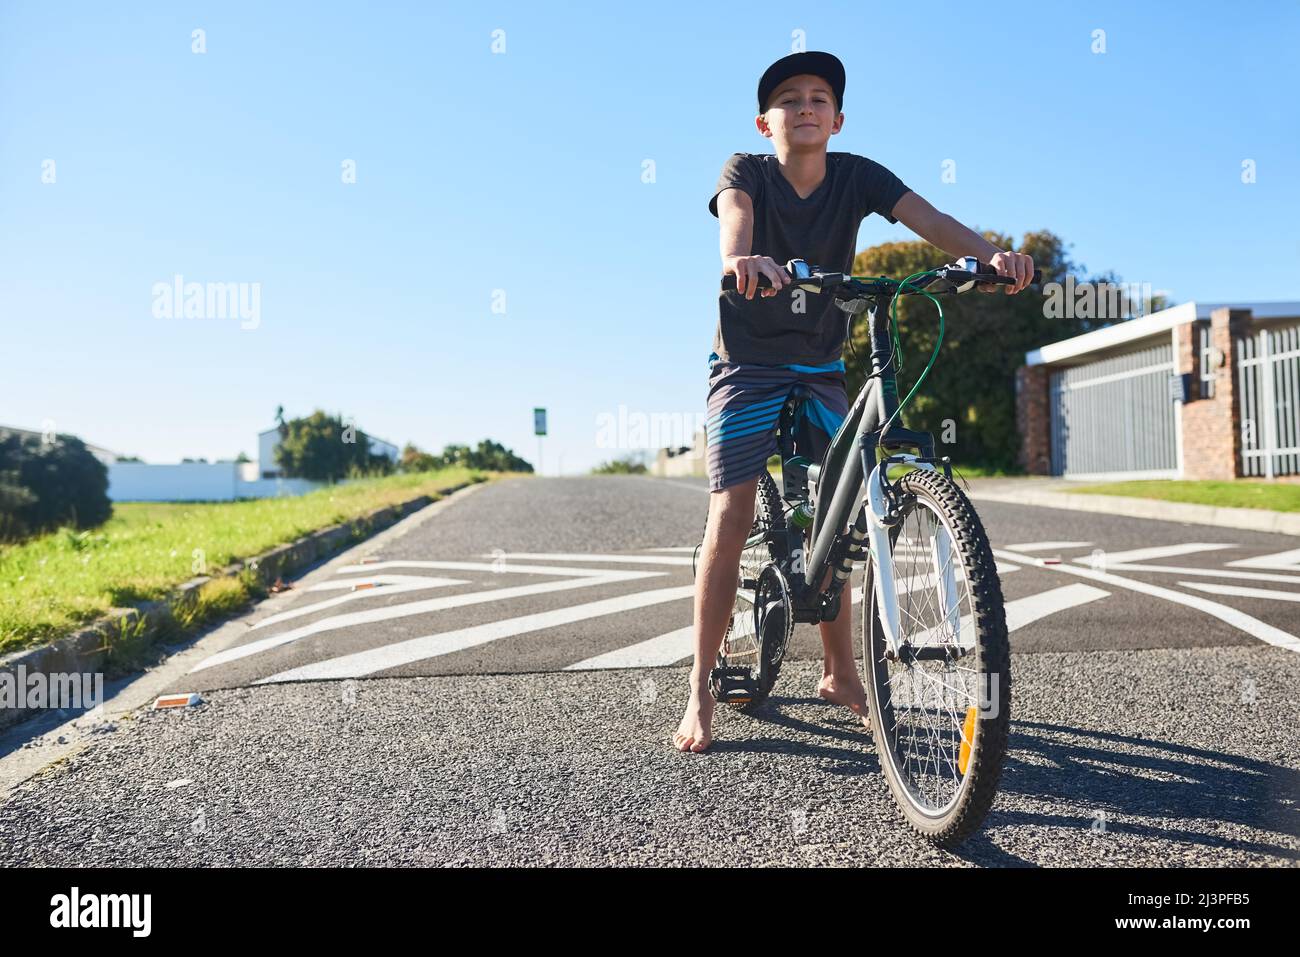 Im cycling the streets. Full length portrait of a young boy riding his bike outside. Stock Photo